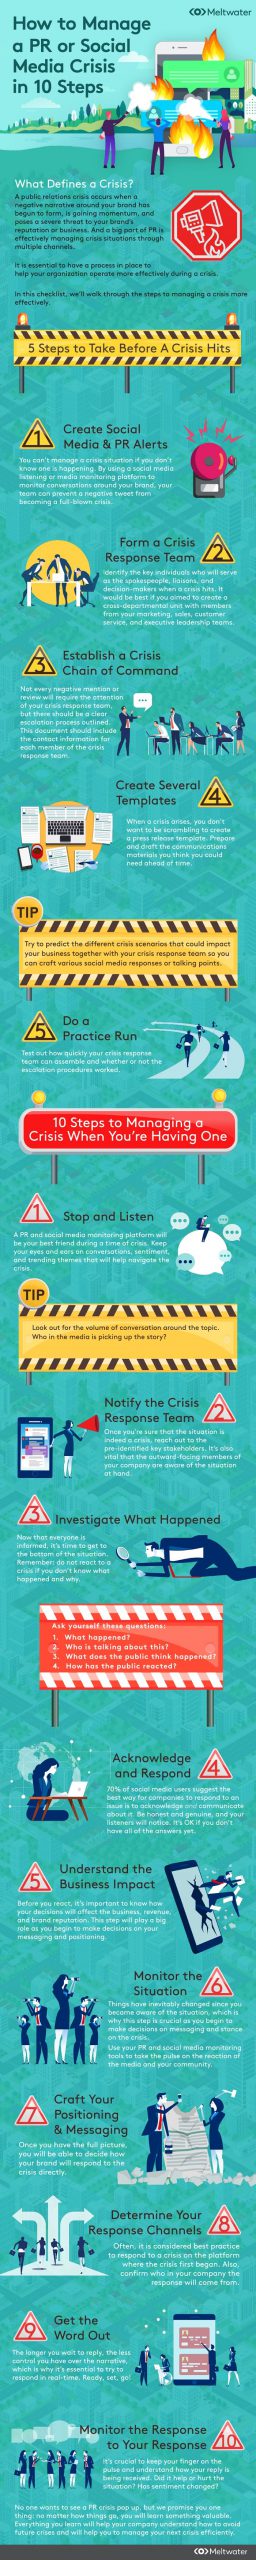 how to manage a pr or social media crisis in 10 steps infographic scaled 1